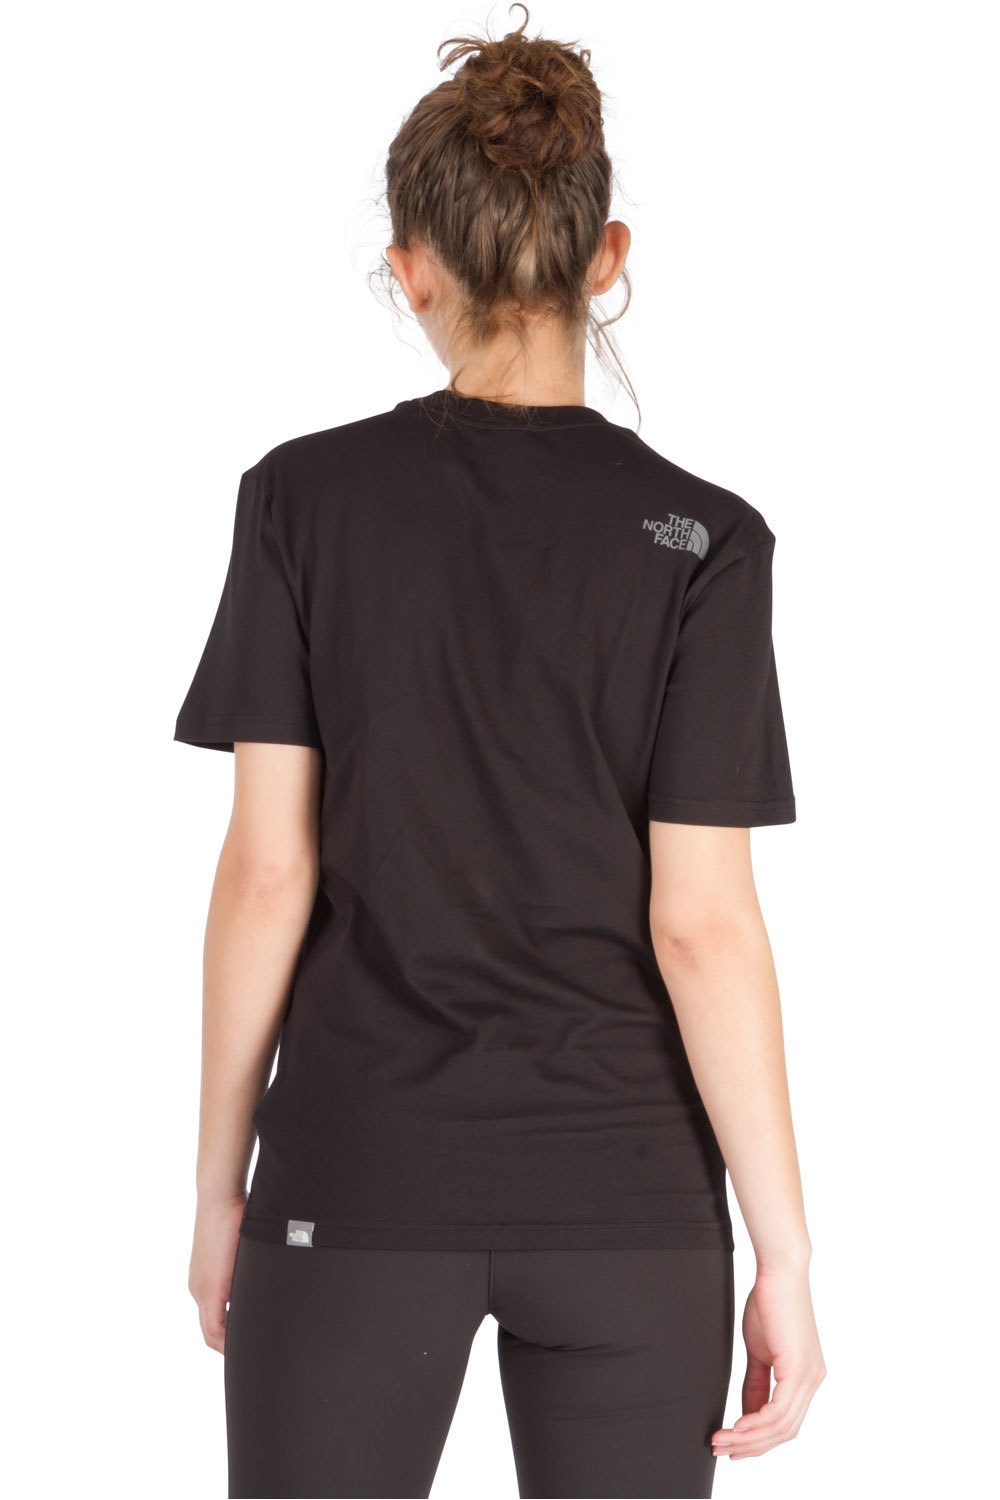 The North Face Easy T-Shirt tnf black - Camisetas hombre